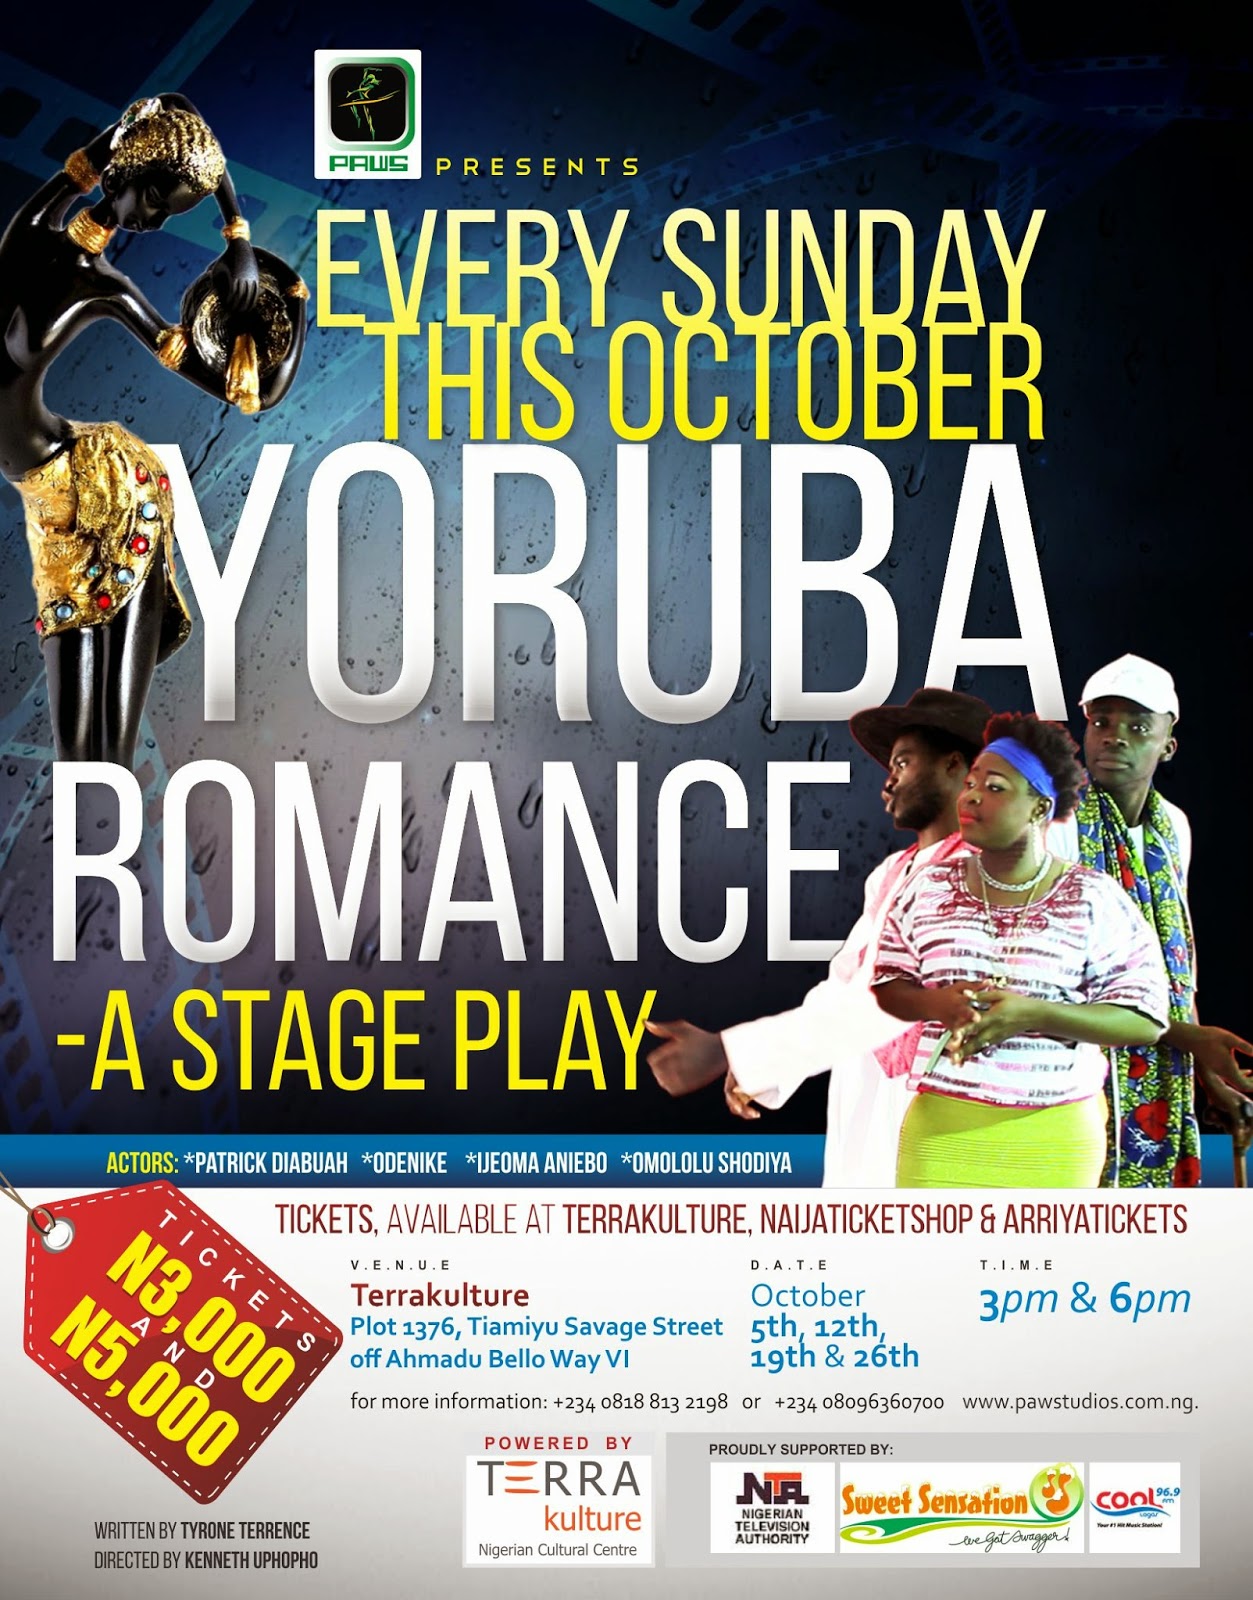 YORUBA ROMANCE- A STAGE PLAY! (EVERY SATURDAY THIS OCTOBER)